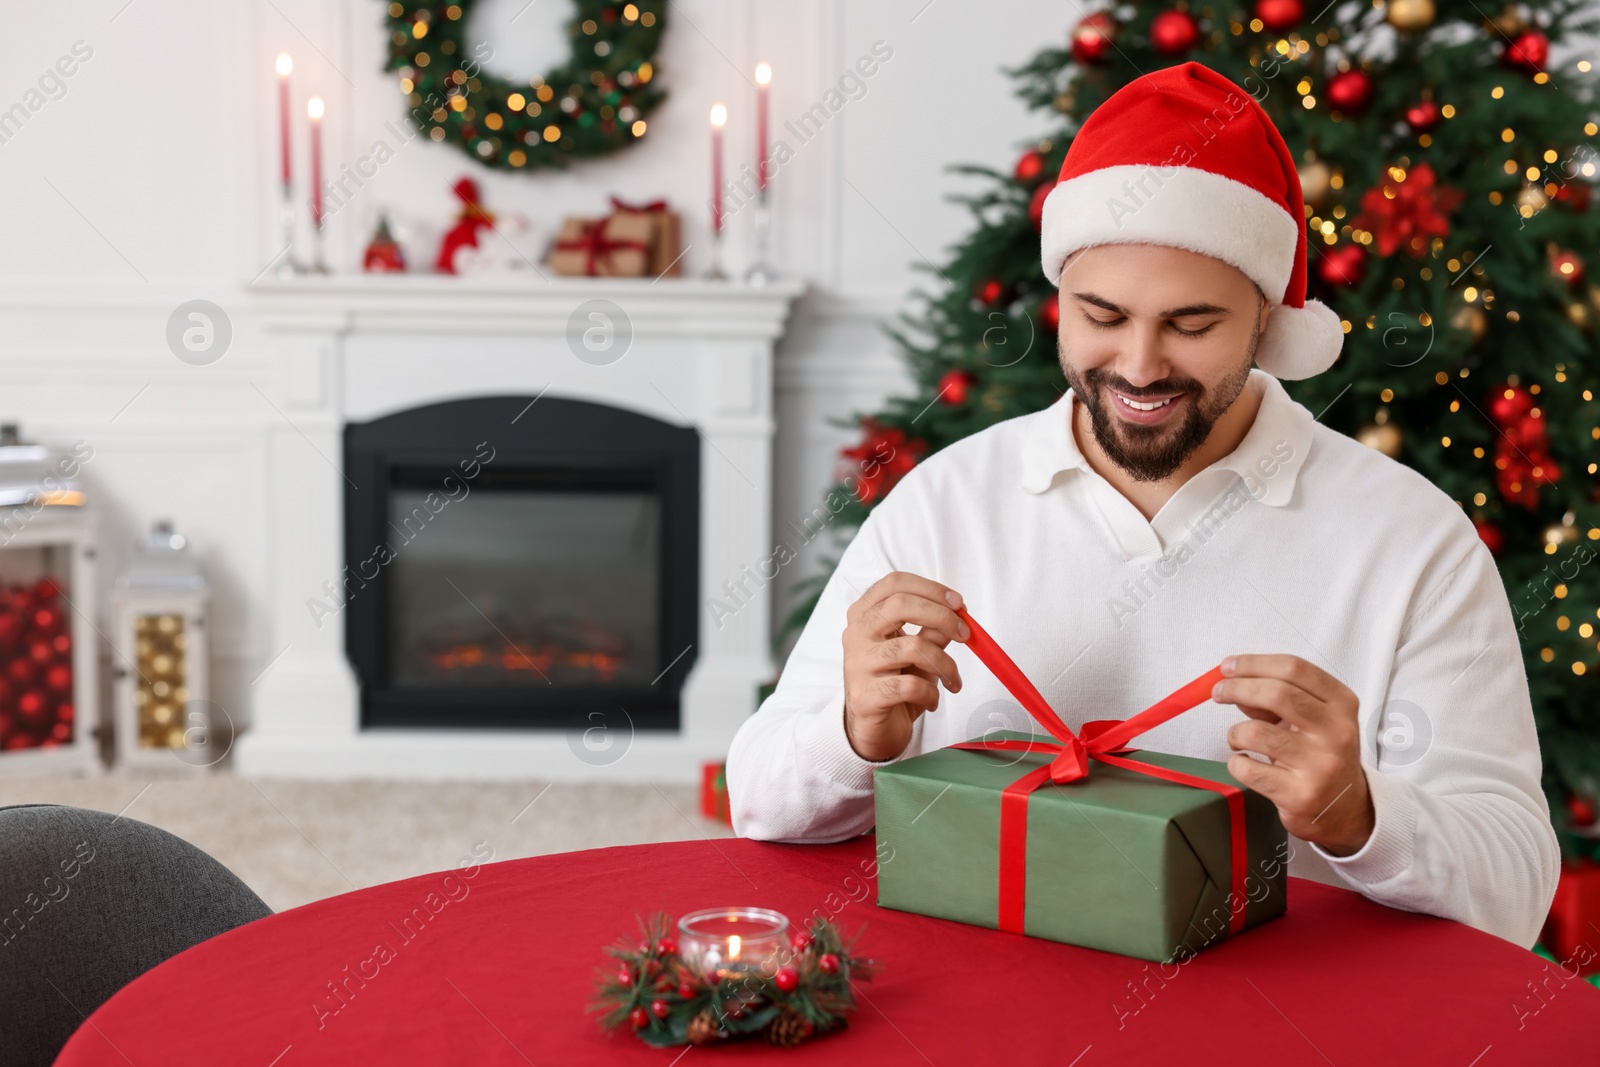 Photo of Happy young man in Santa hat opening Christmas gift at table in decorated room